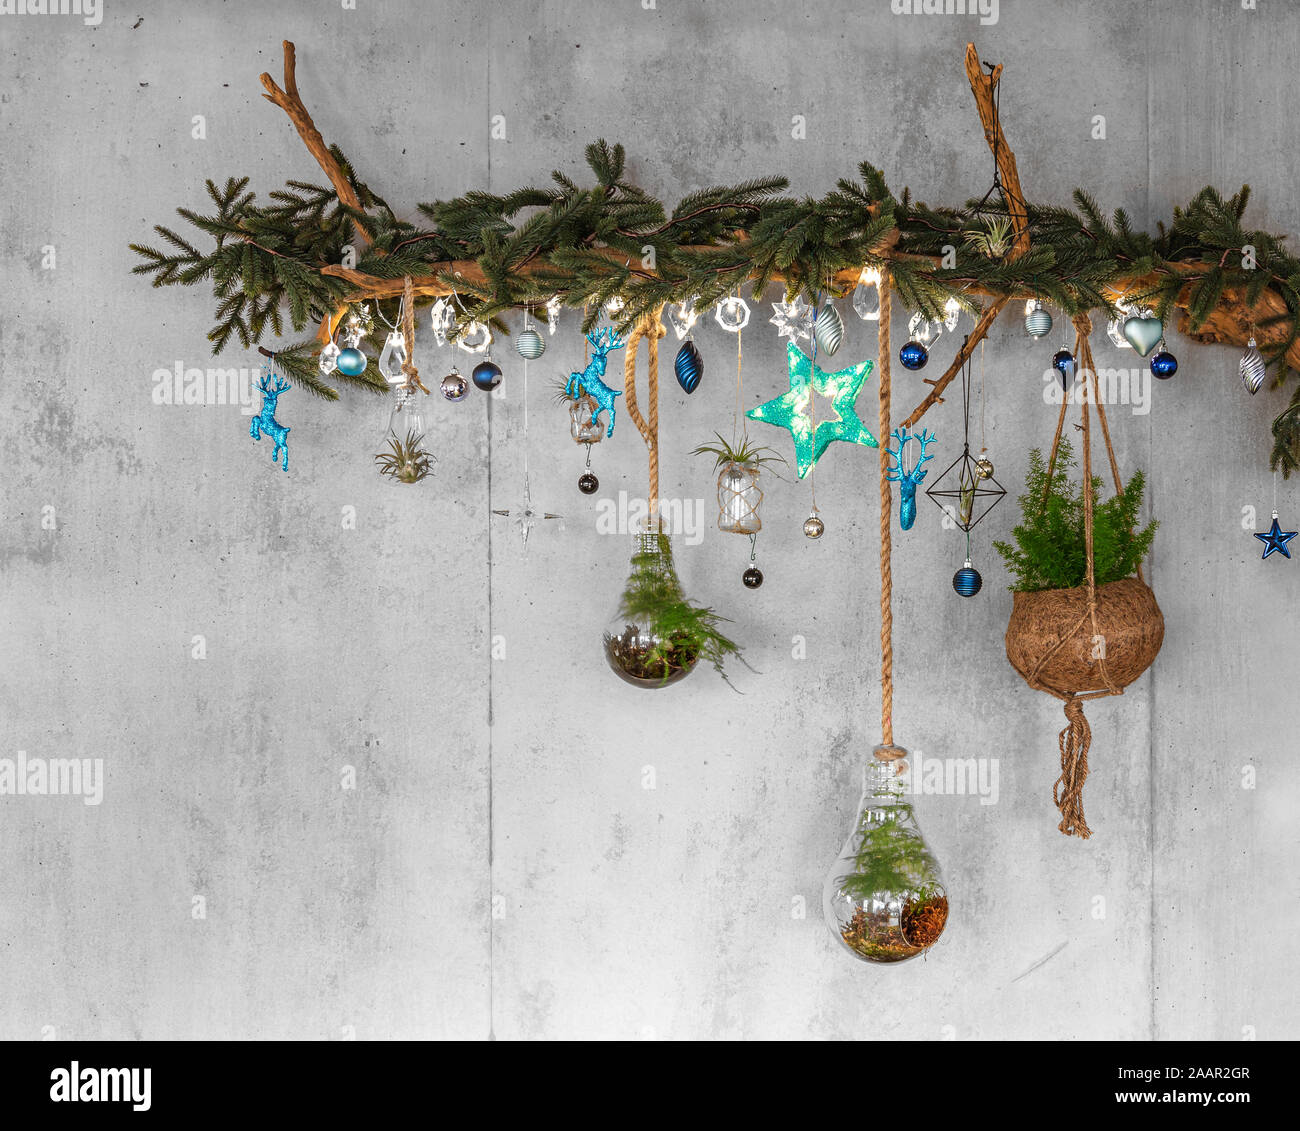 Decorative Wooden Branch with fir branches and hanging teal christmas baubles, silver lights like snowflakes, fern and air plant, on a modern cement o Stock Photo